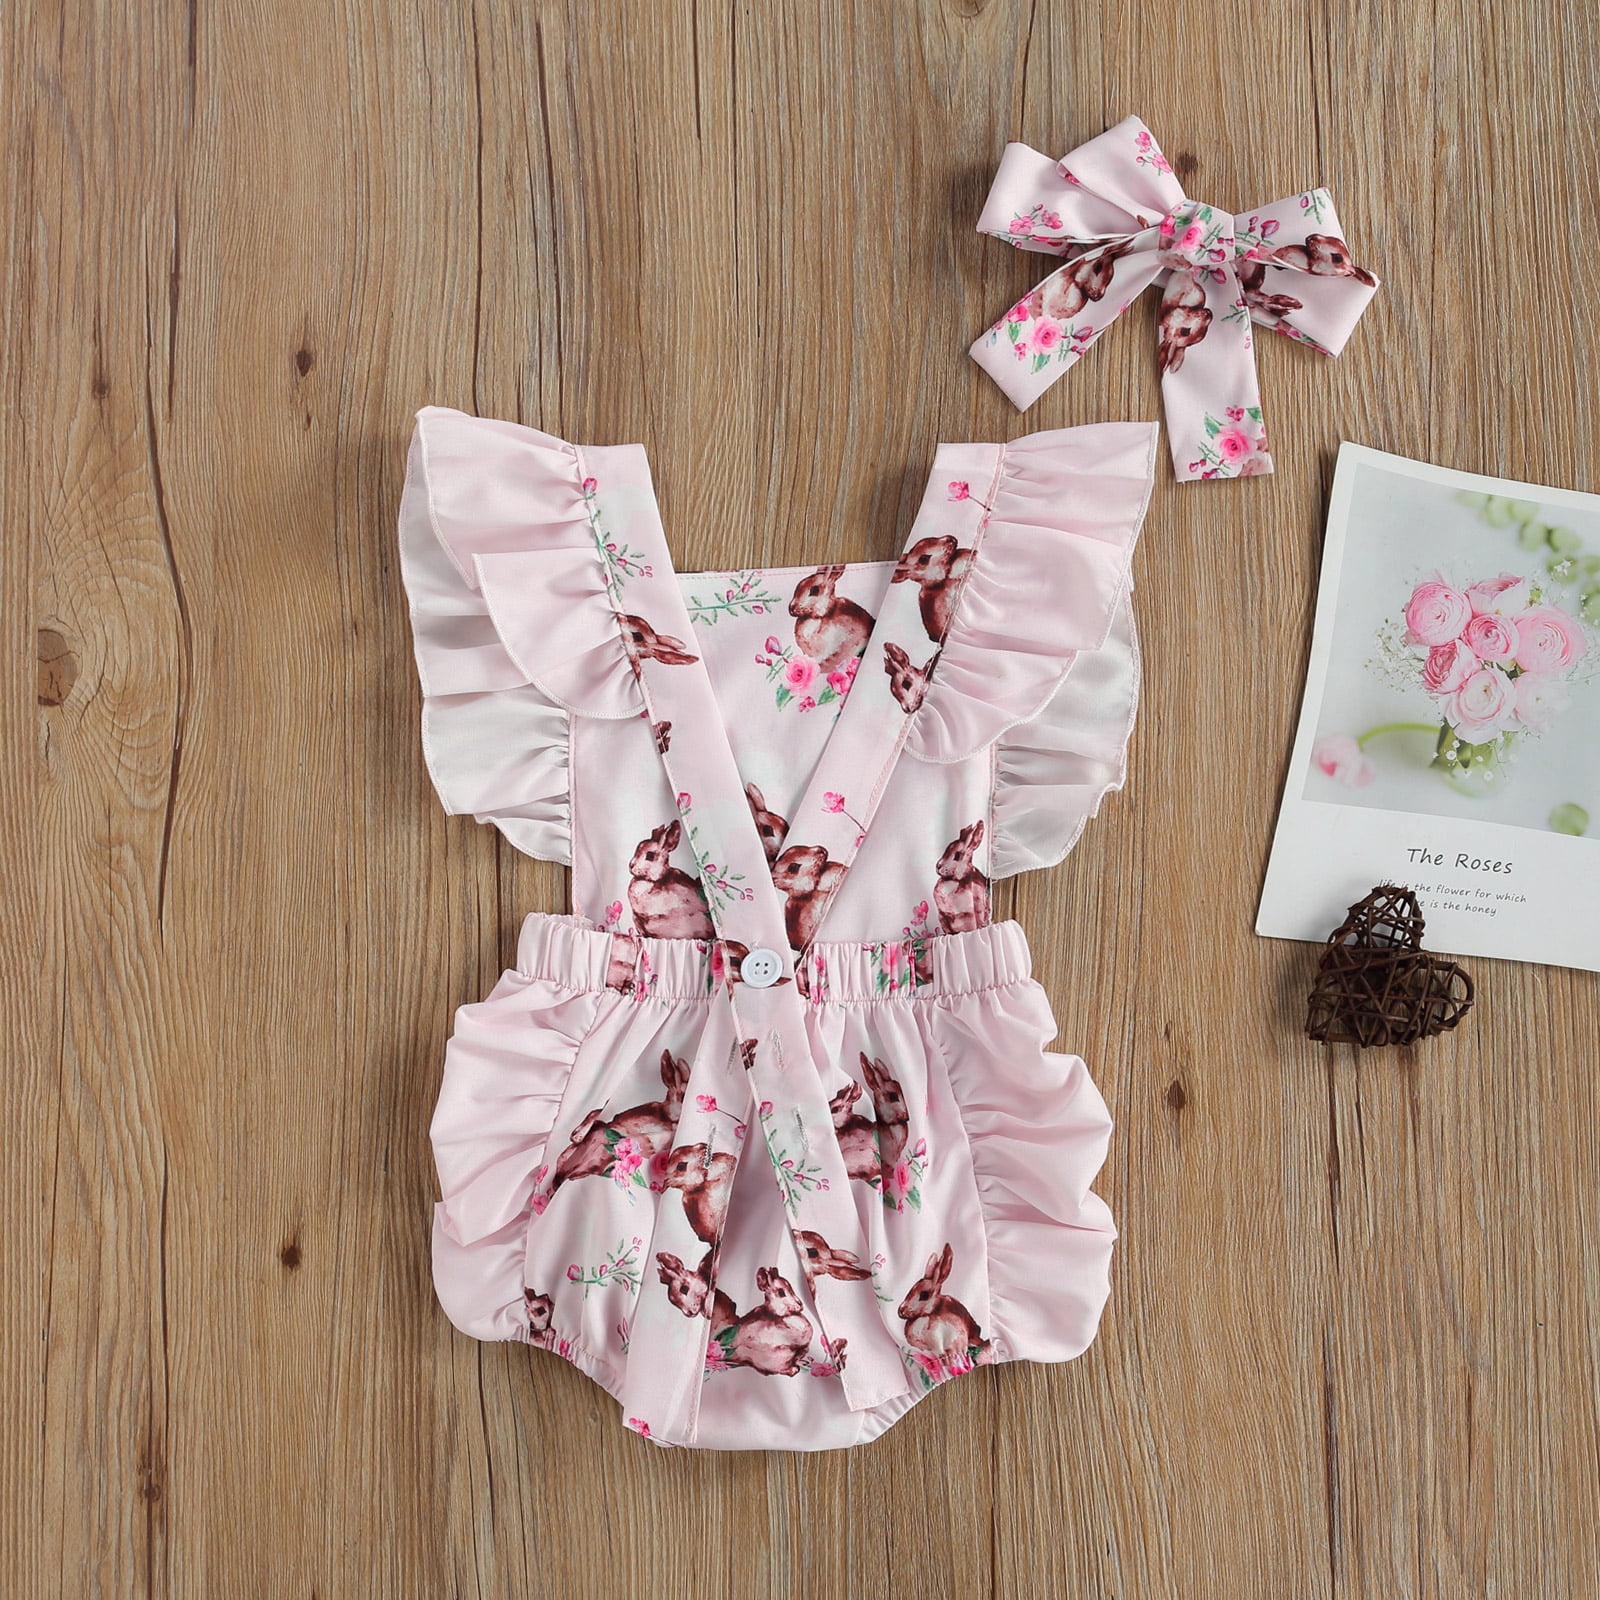 NEW IN GIRLS BABY PINK ROMPERS JAM PANT/TOP SPANISH INSPIRED BIG BOWS NEWBORN-6M 